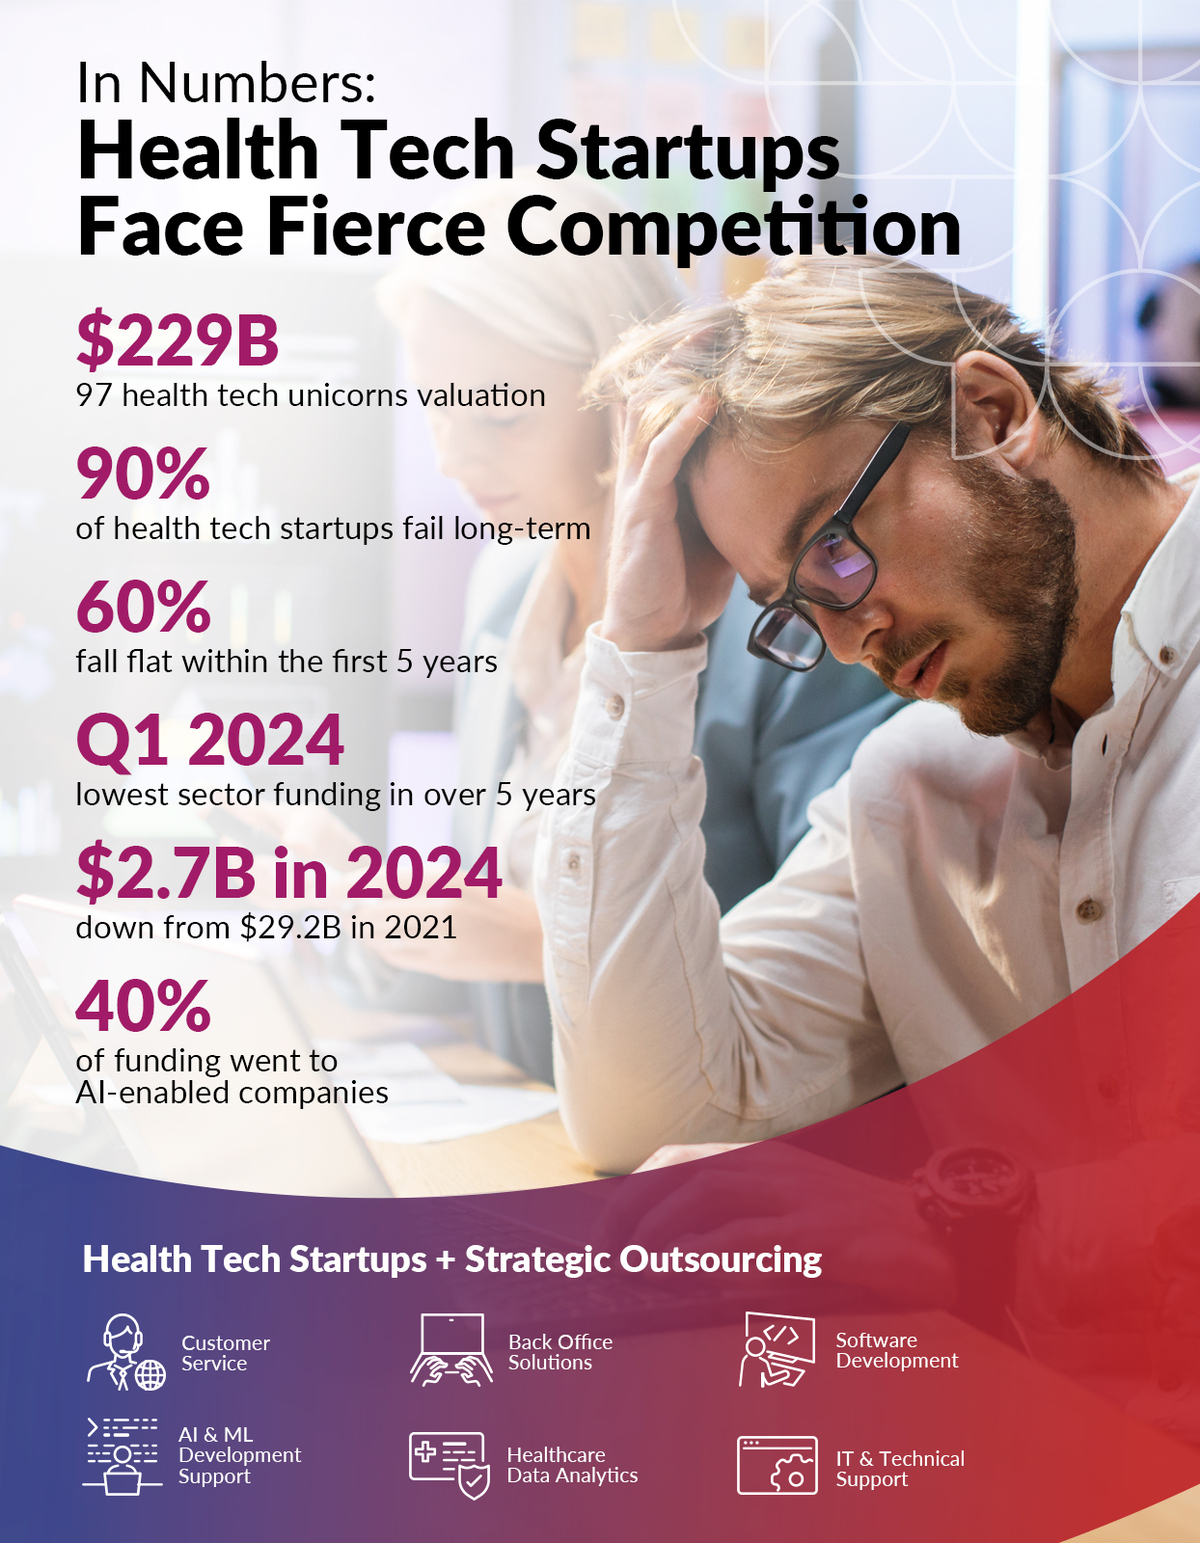 A tech CEO looks worried. Image caption reads: Health Tech Startups face Fierce Competition.